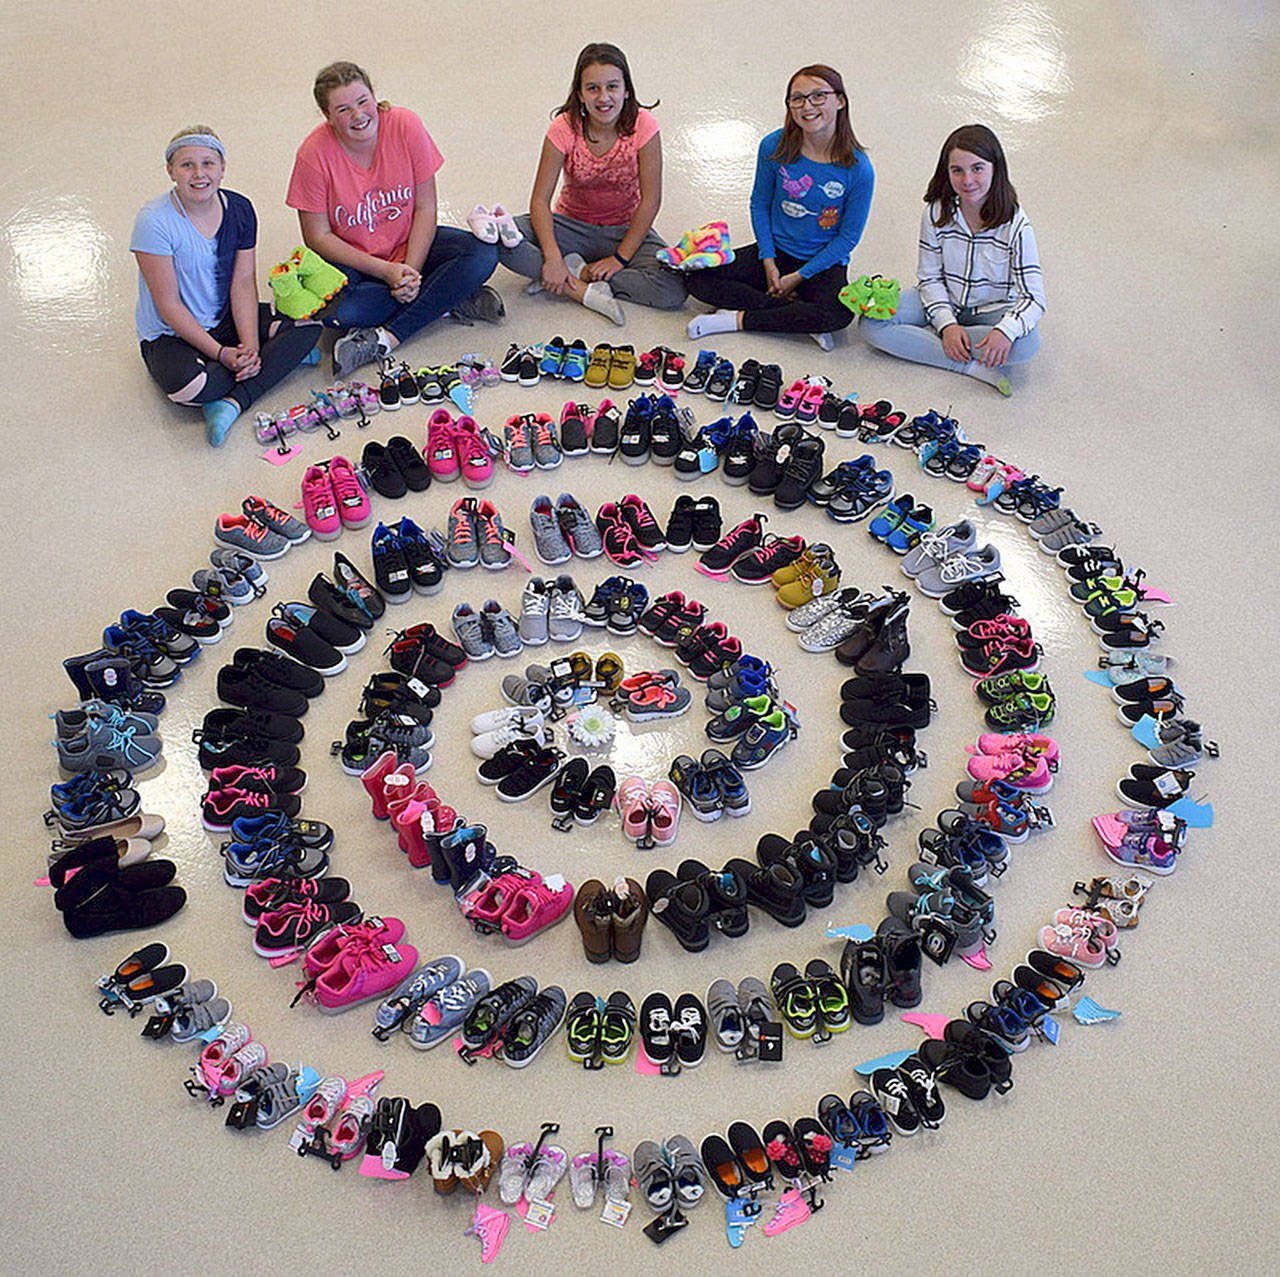 Girl Scouts with Troop 45181, from left, Adrianna Delph, Paige Krzyworz, Mia Kirner, Alexys Amaya and Izzy Taylor helped bring in more than 130 pairs of new shoes for Clallam County foster children through a recent shoe drive. Not pictured are Desirea and Mya Spalding.